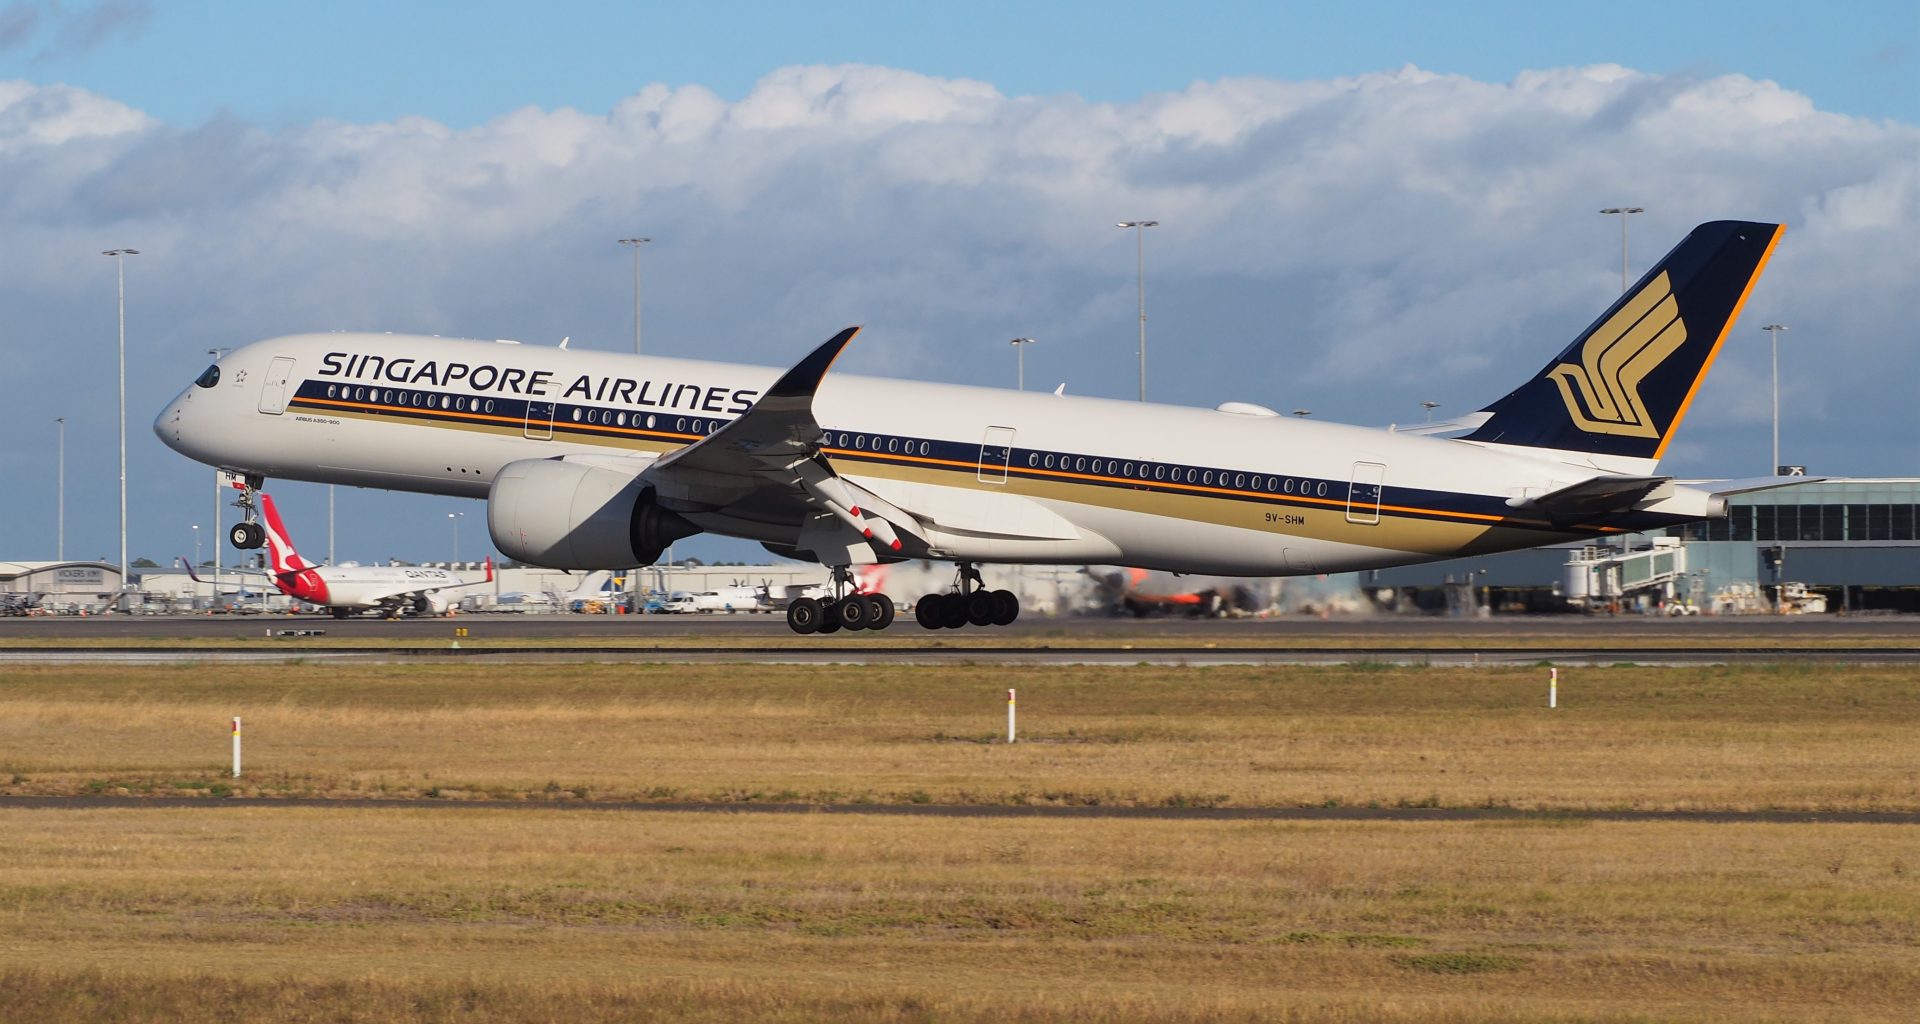 Singapore Airlines reintroducing their full pre-pandemic flight schedule from London Heathrow © Tony Haynes / Flickr Commons